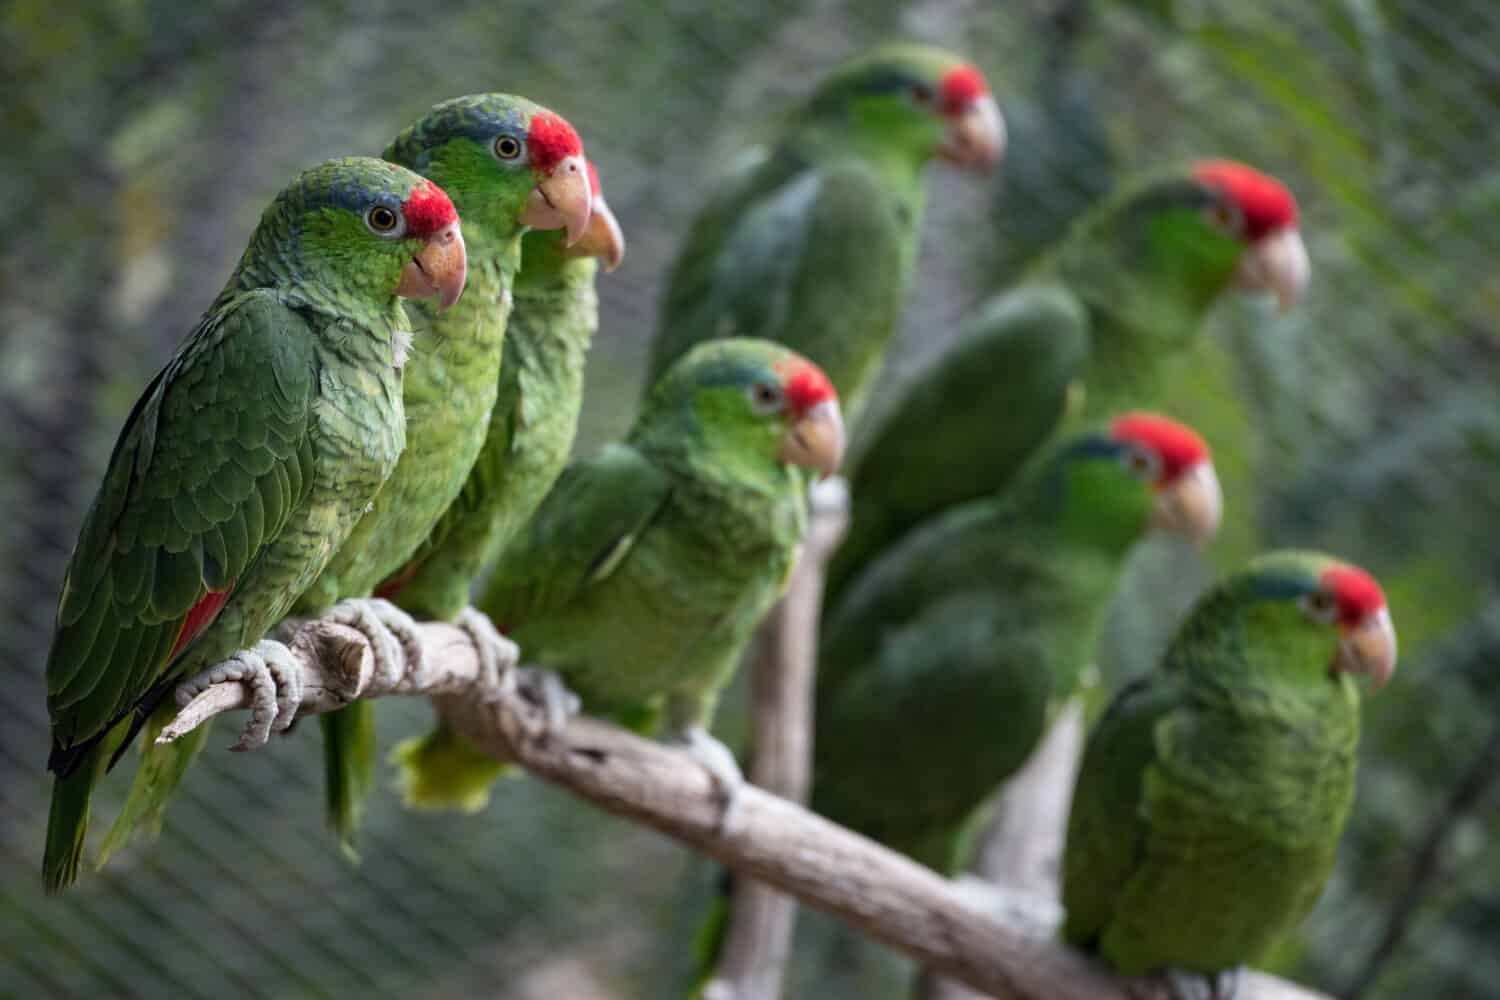 Red-crowned Parrots are popular pets that have become common escapees in American cities.  They nest in palm trees. They are now being released from captivity to be wild parrots in the United States.